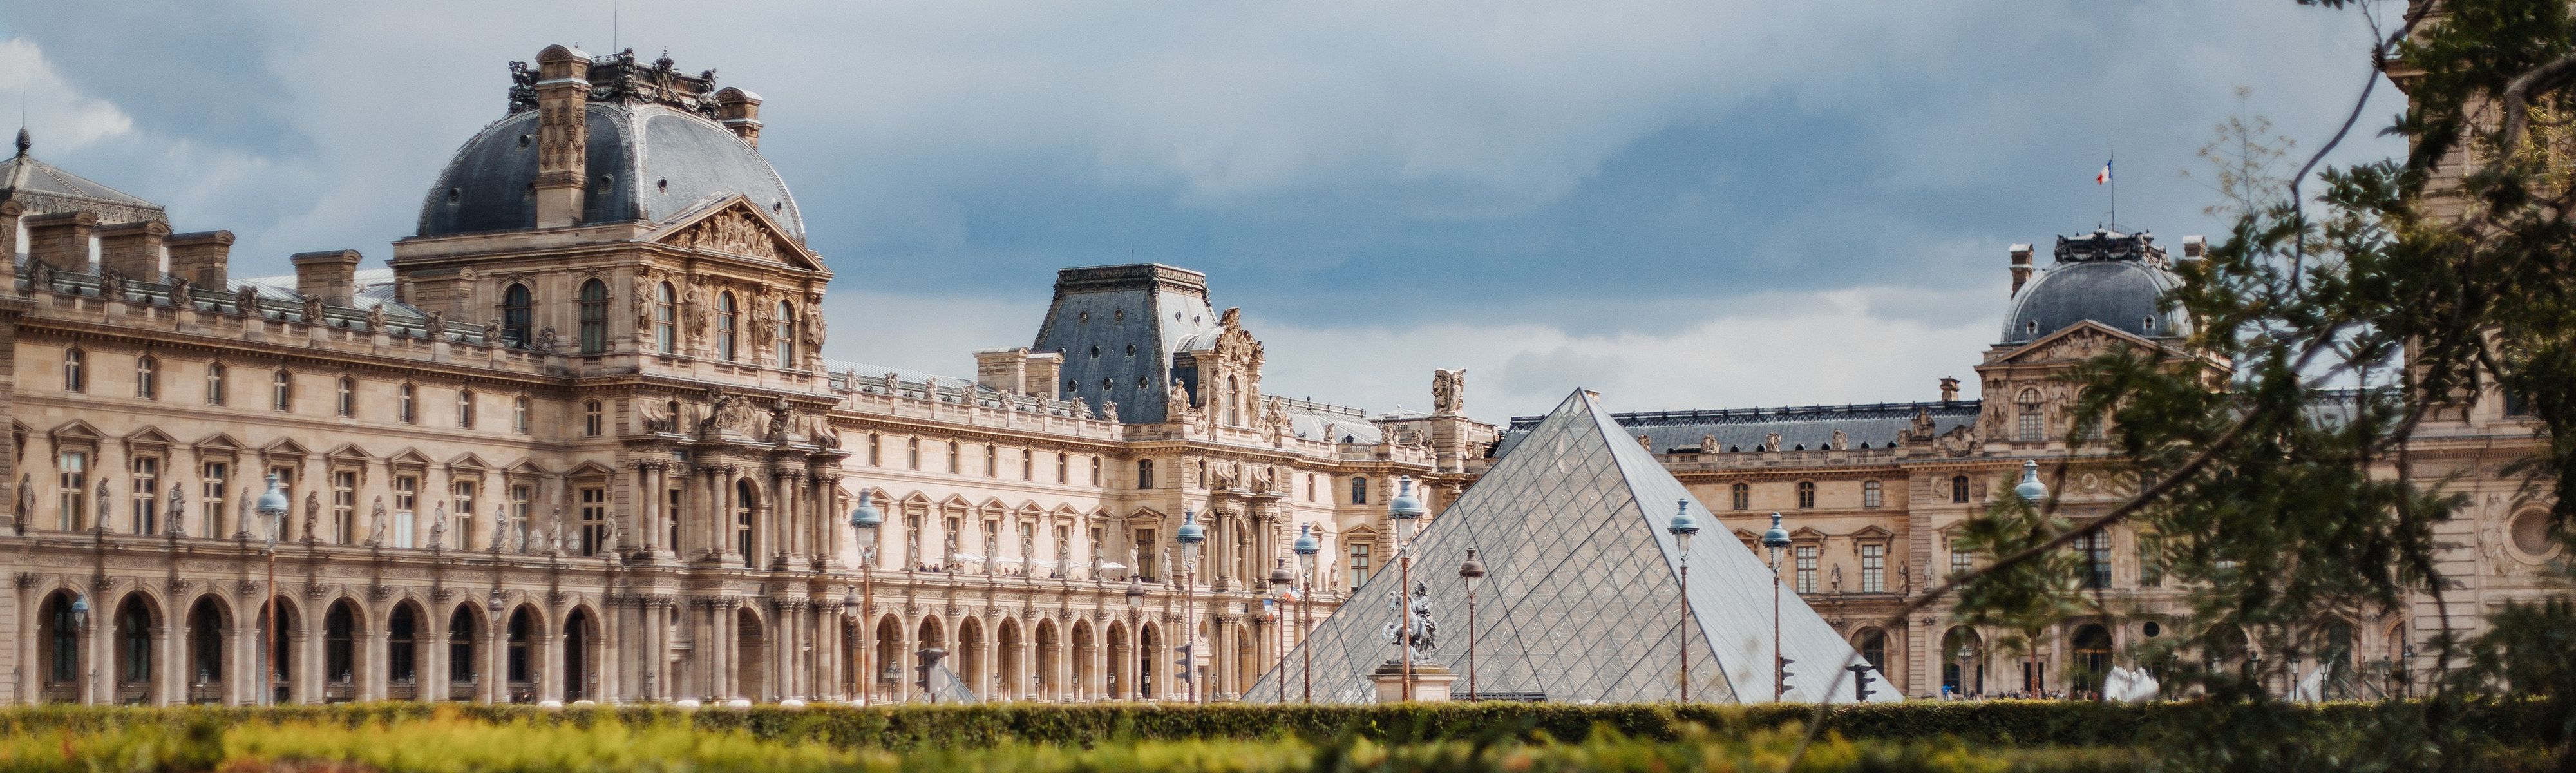 the louvre surrounded by the louvre castle in paris france